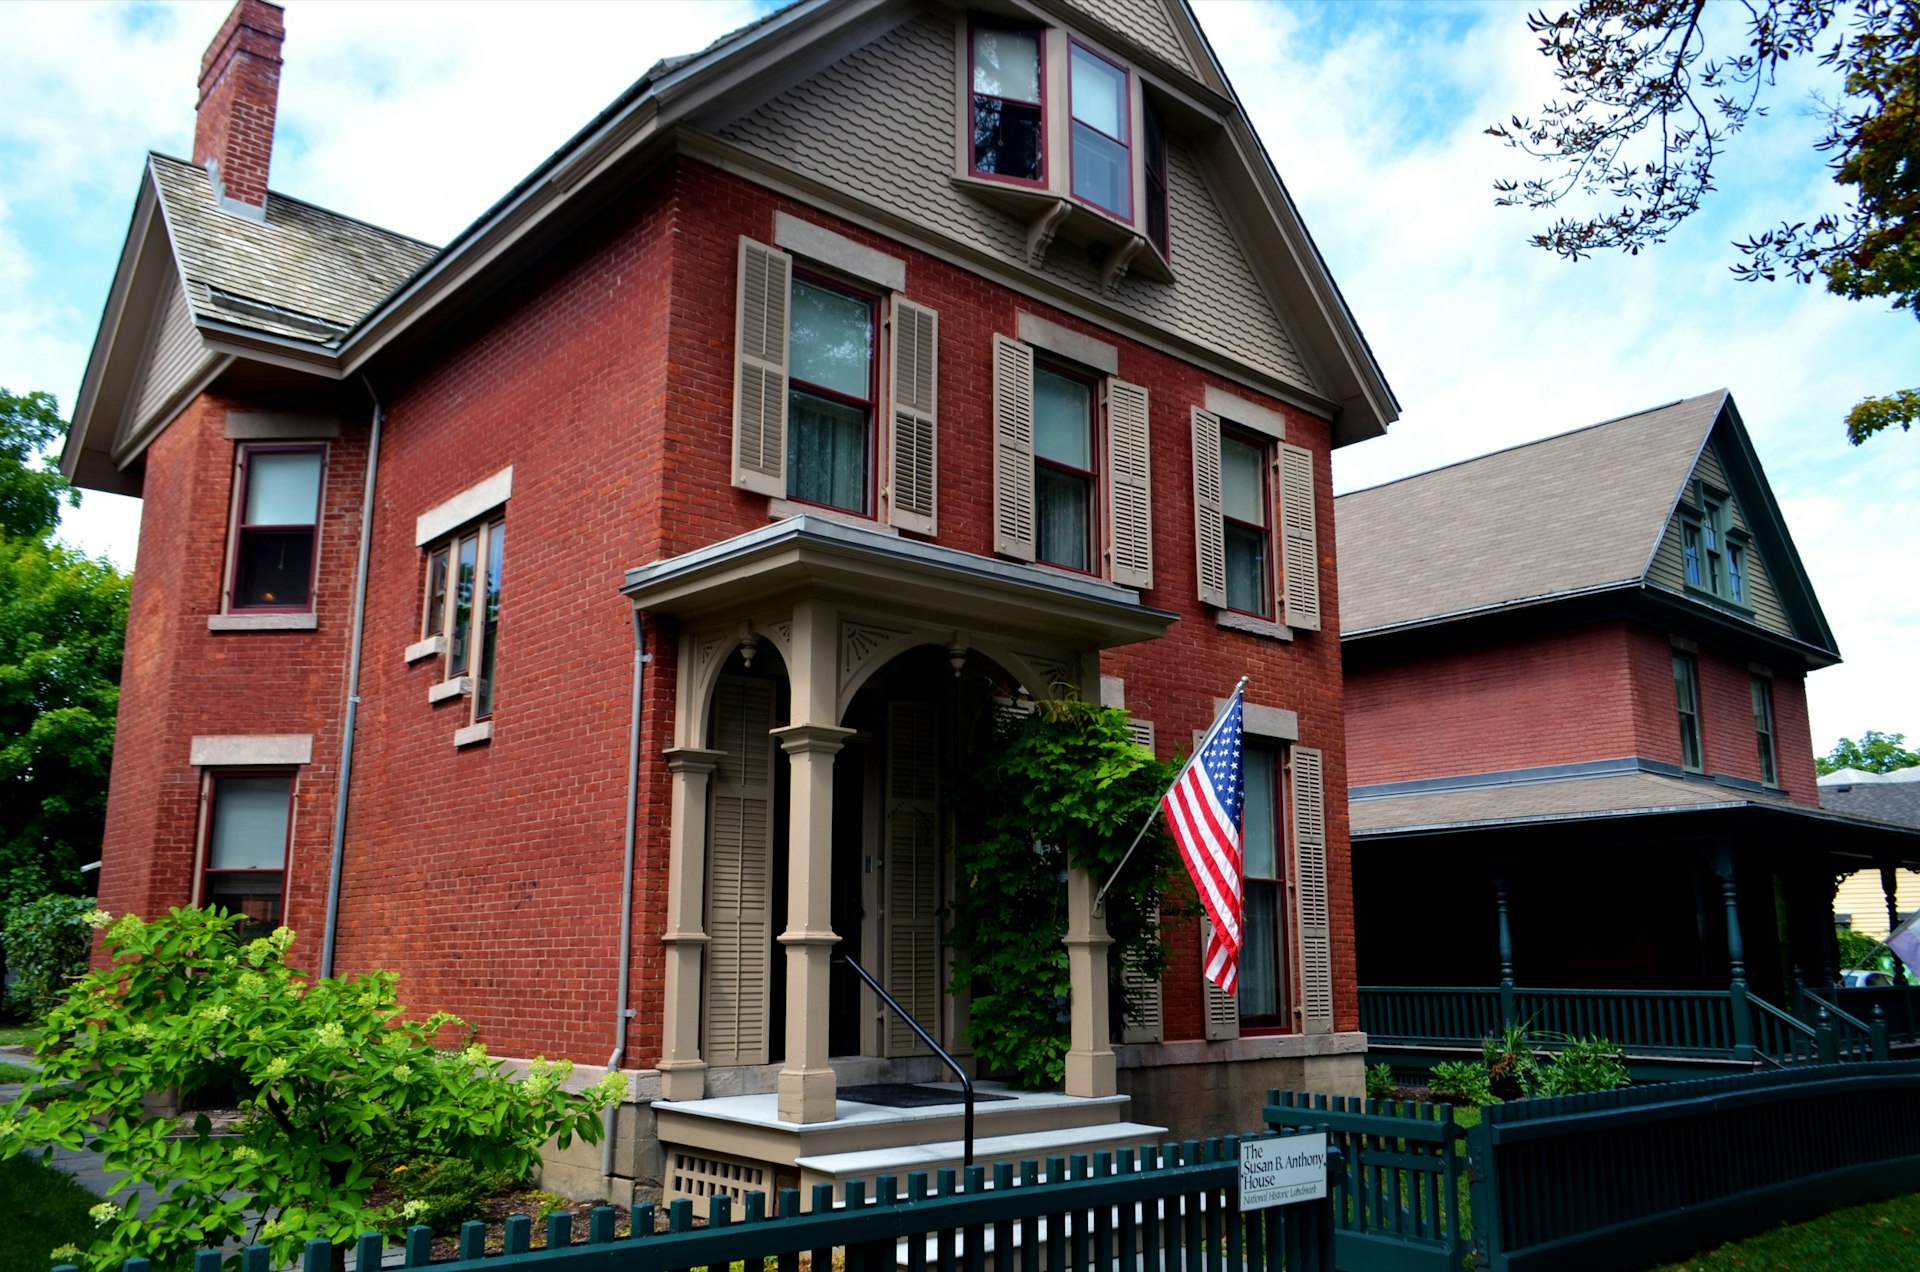 A red brick house with an American flag and a sign saying it's Susan B. Anthony's house in Rochester, New York